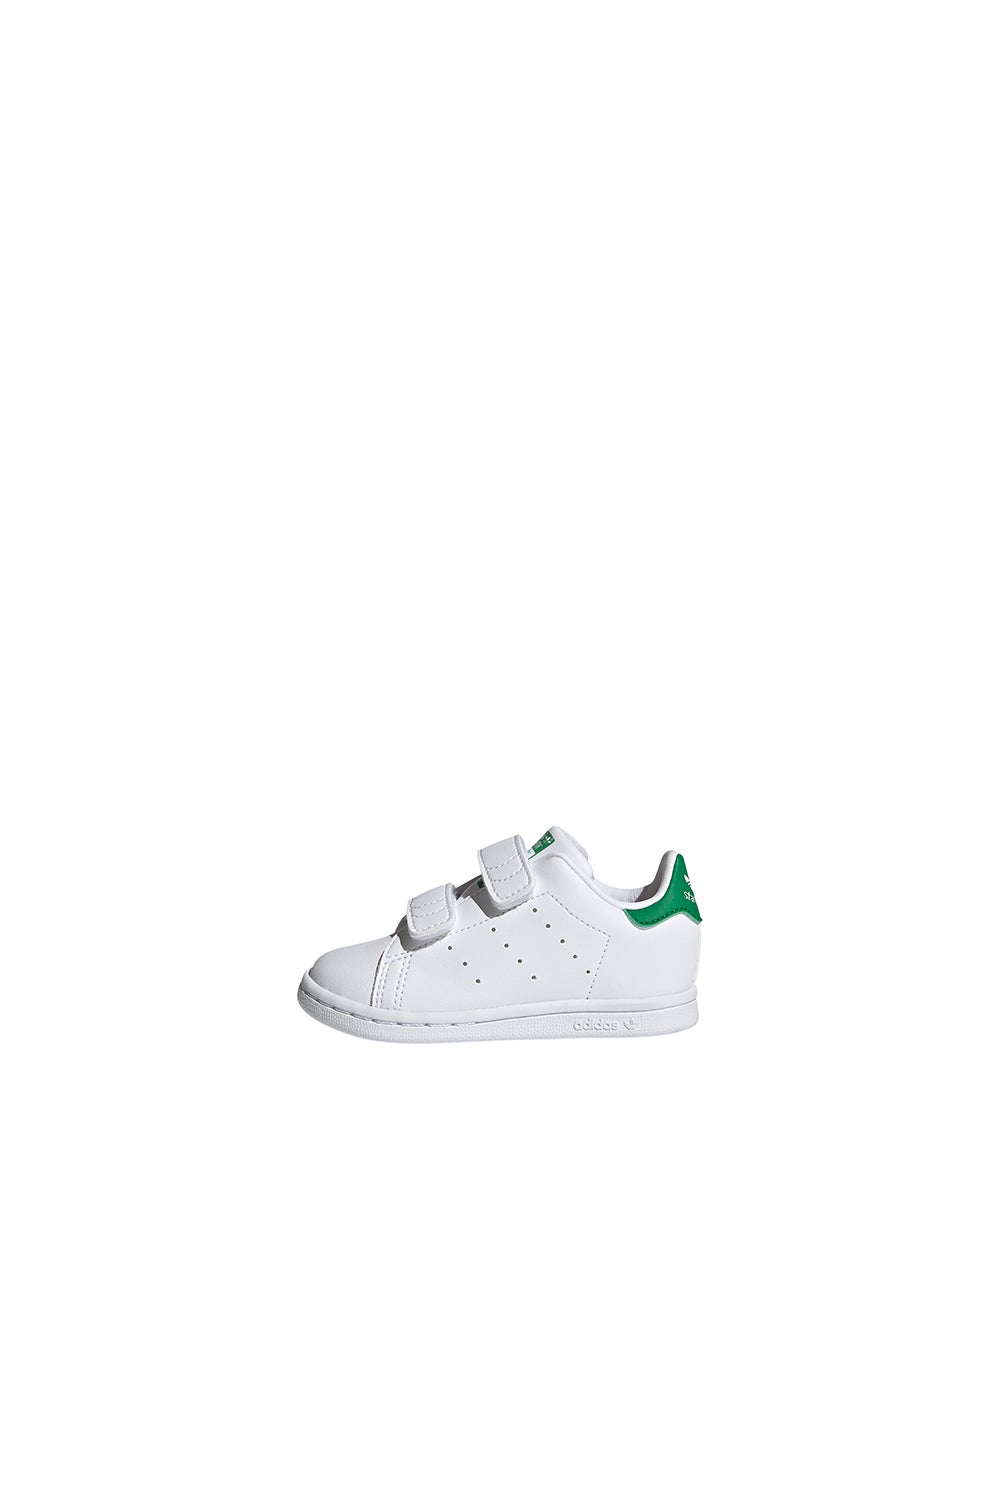 adidas Stan Smith Infant Shoes Cloud White/Green